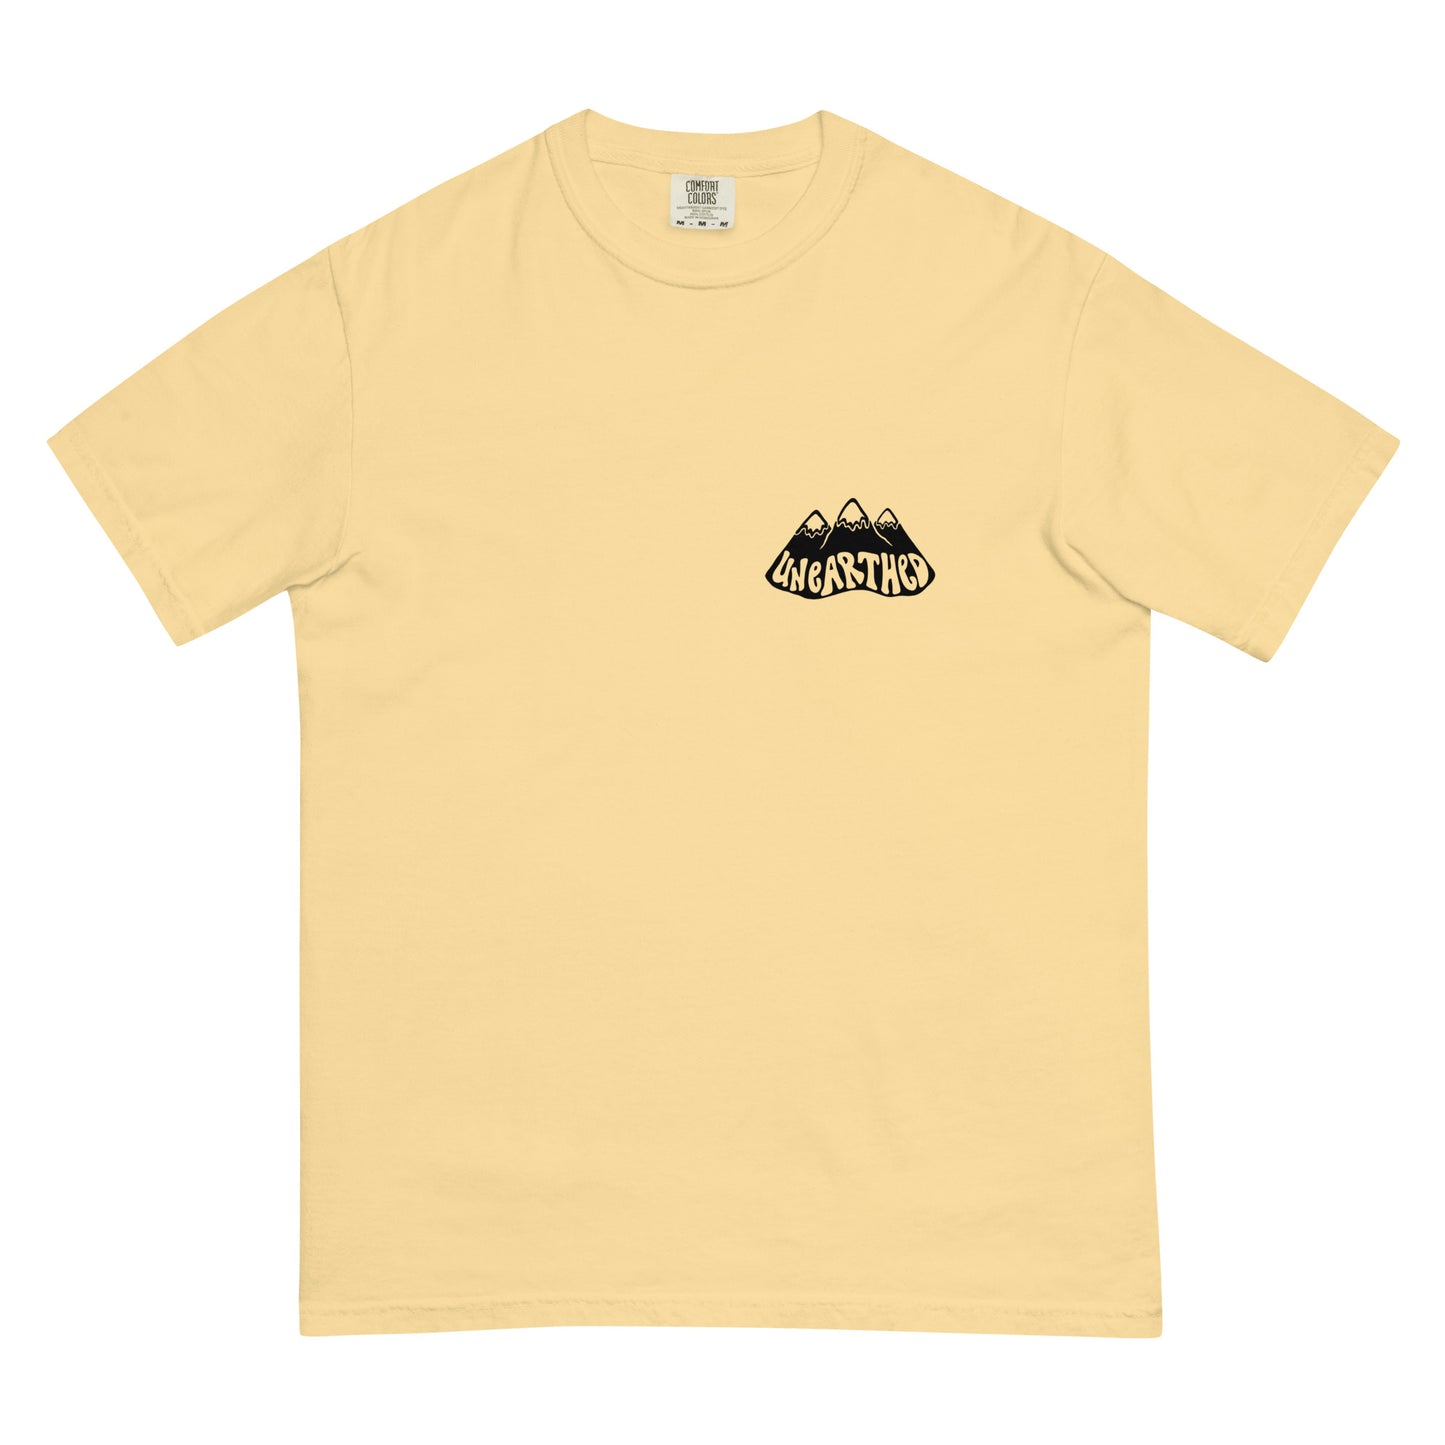 unearthed mountains garment-dyed heavyweight t-shirt